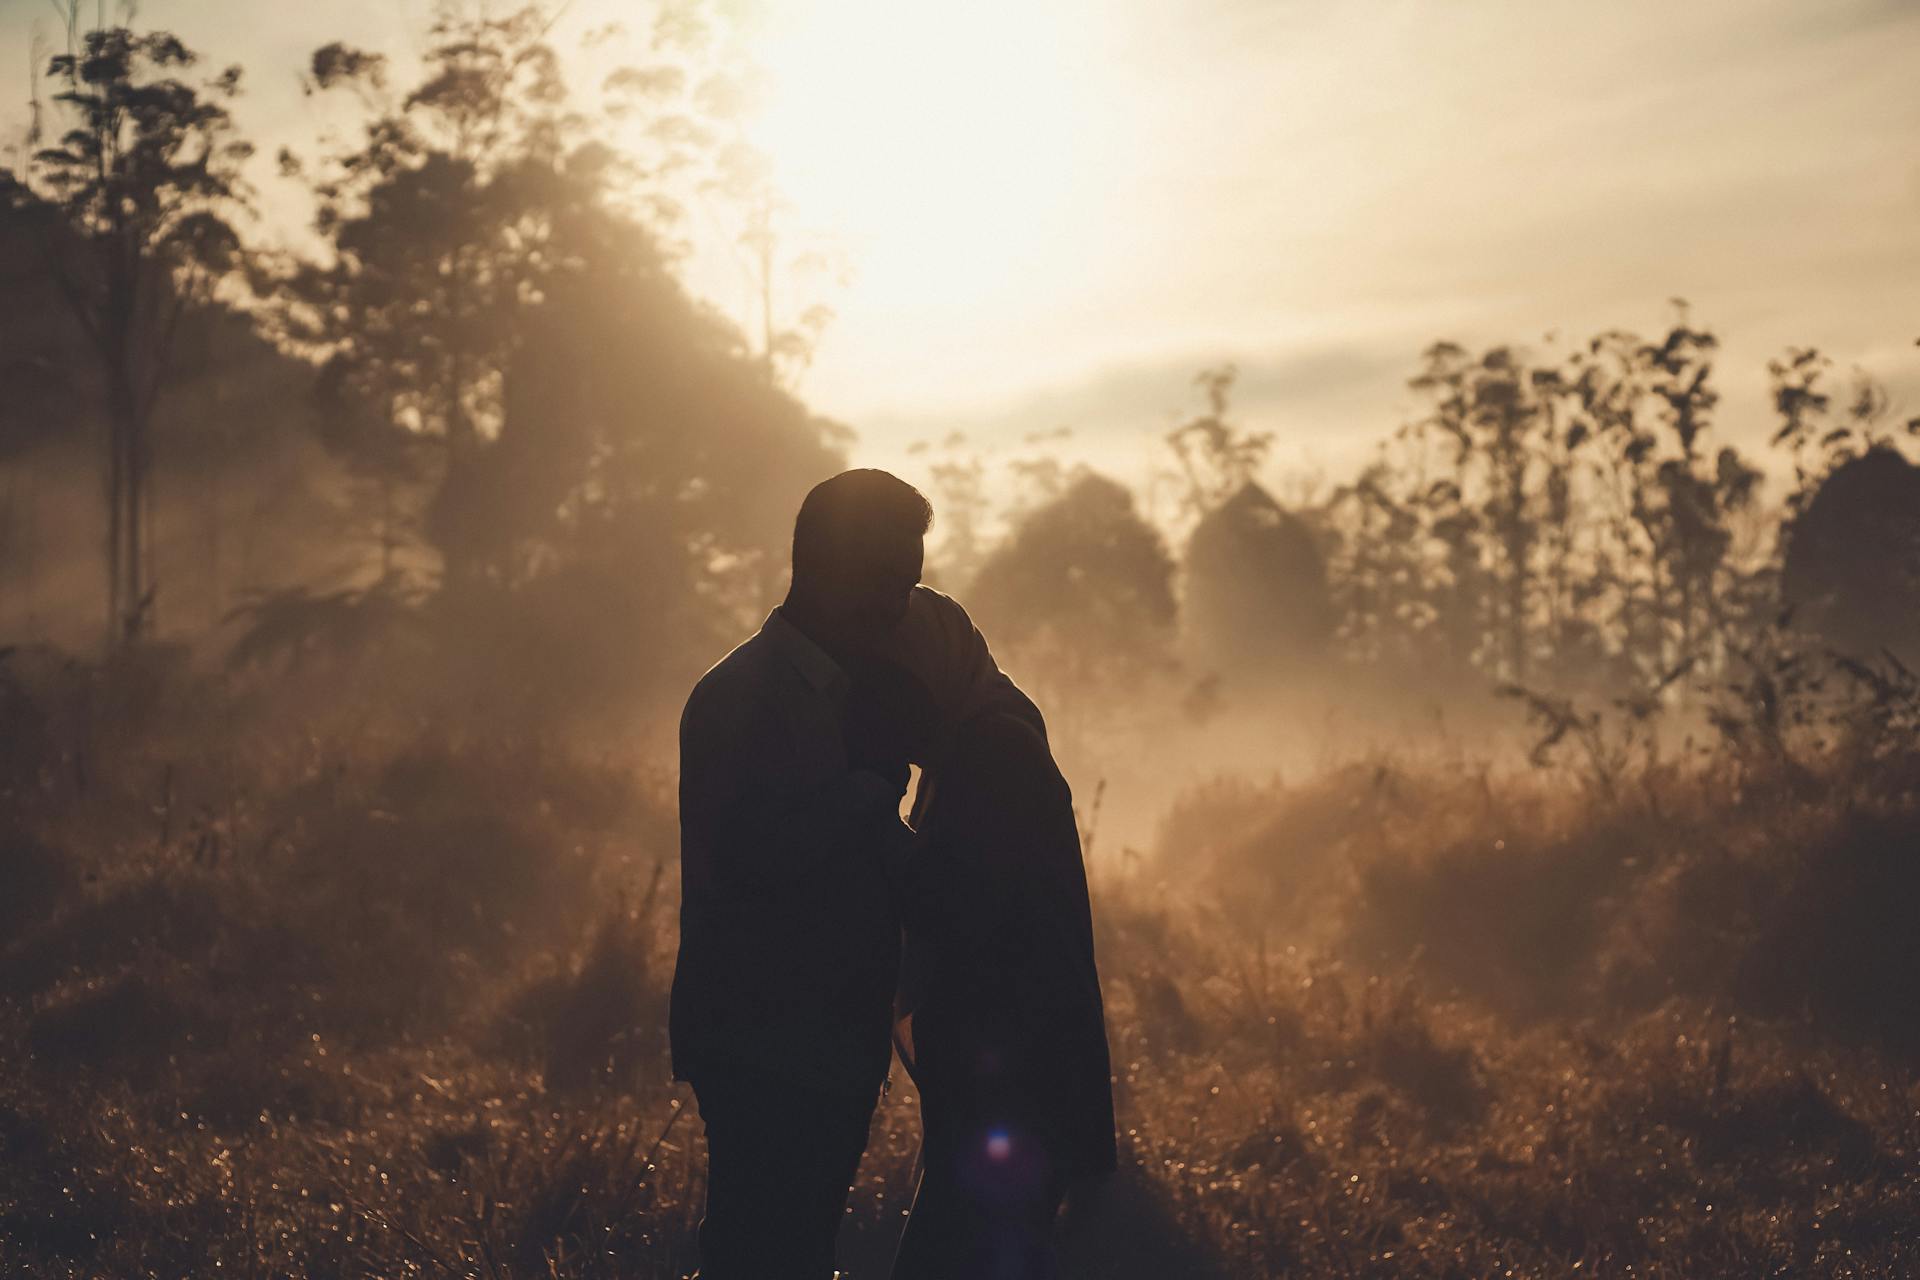 A silhouette of a couple in a field | Source: Pexels